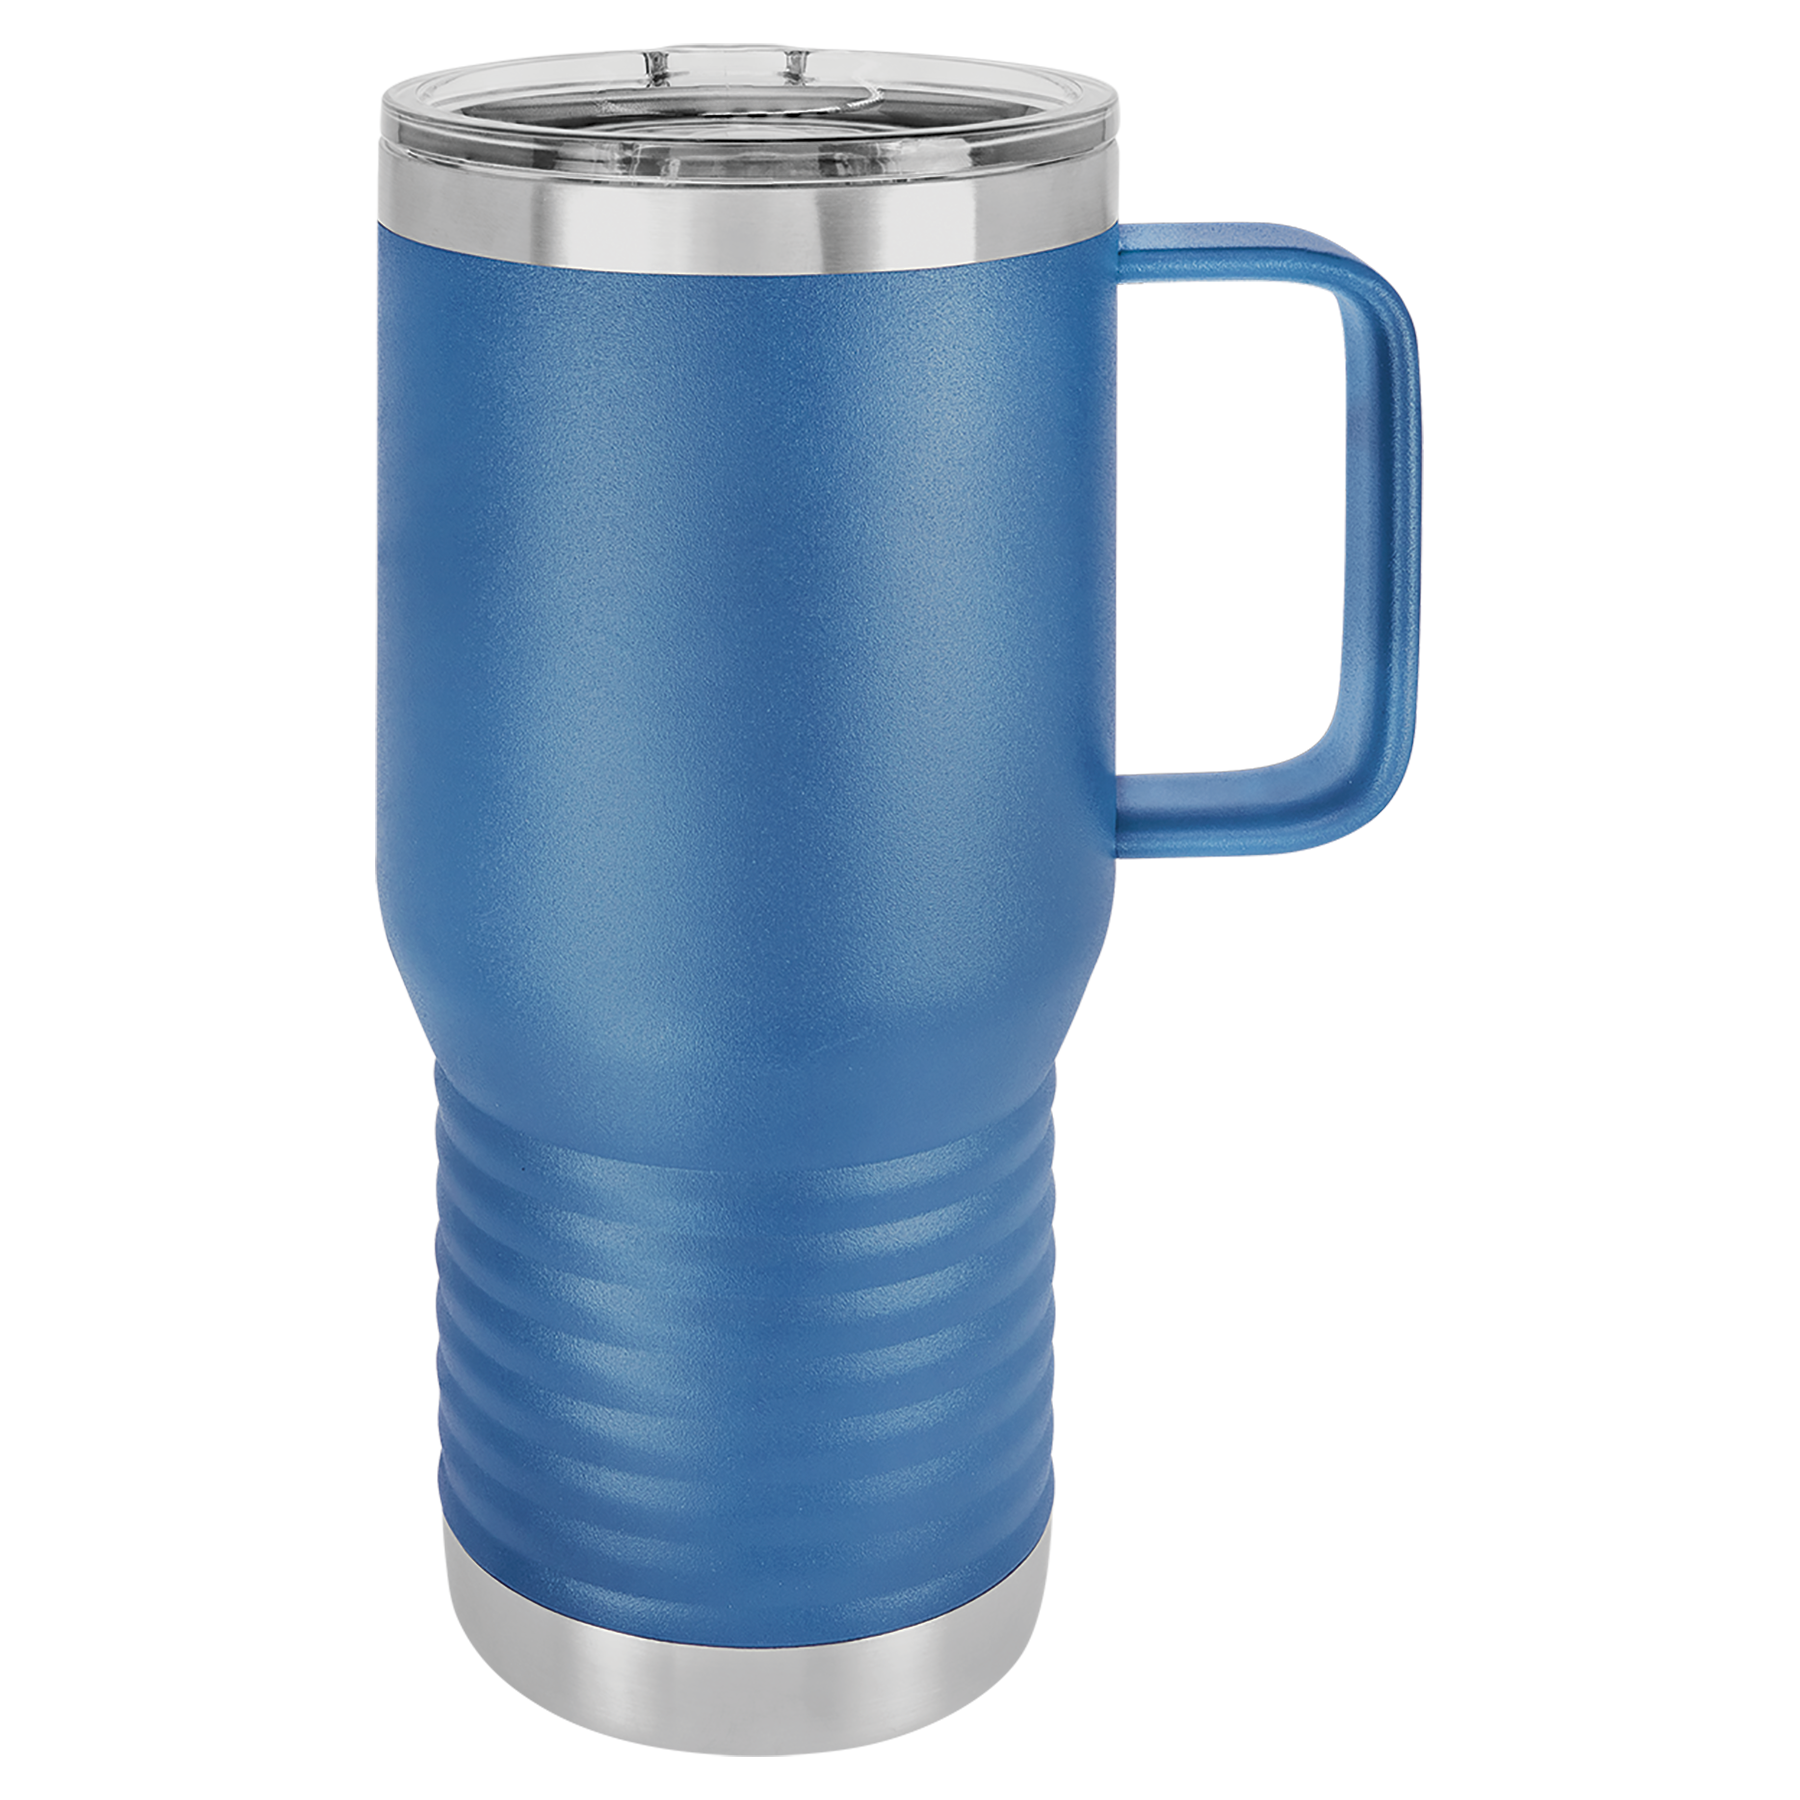 Royal Blue 20oz Travel Mug -One Free Engraving -Fits most Cup Holders -Double-wall Vacuum Insulated -Made from 18/8 Gauge Stainless Steel (Type 304 Food Grade) -Lid is BPA Free (Hand Wash Only) -Not recommended for Dishwasher -Works with Cold and Hot Drinks -18 Color Options -Perfect for Personalized Gifts, Awards, Incentives, Swag & Fundraisers